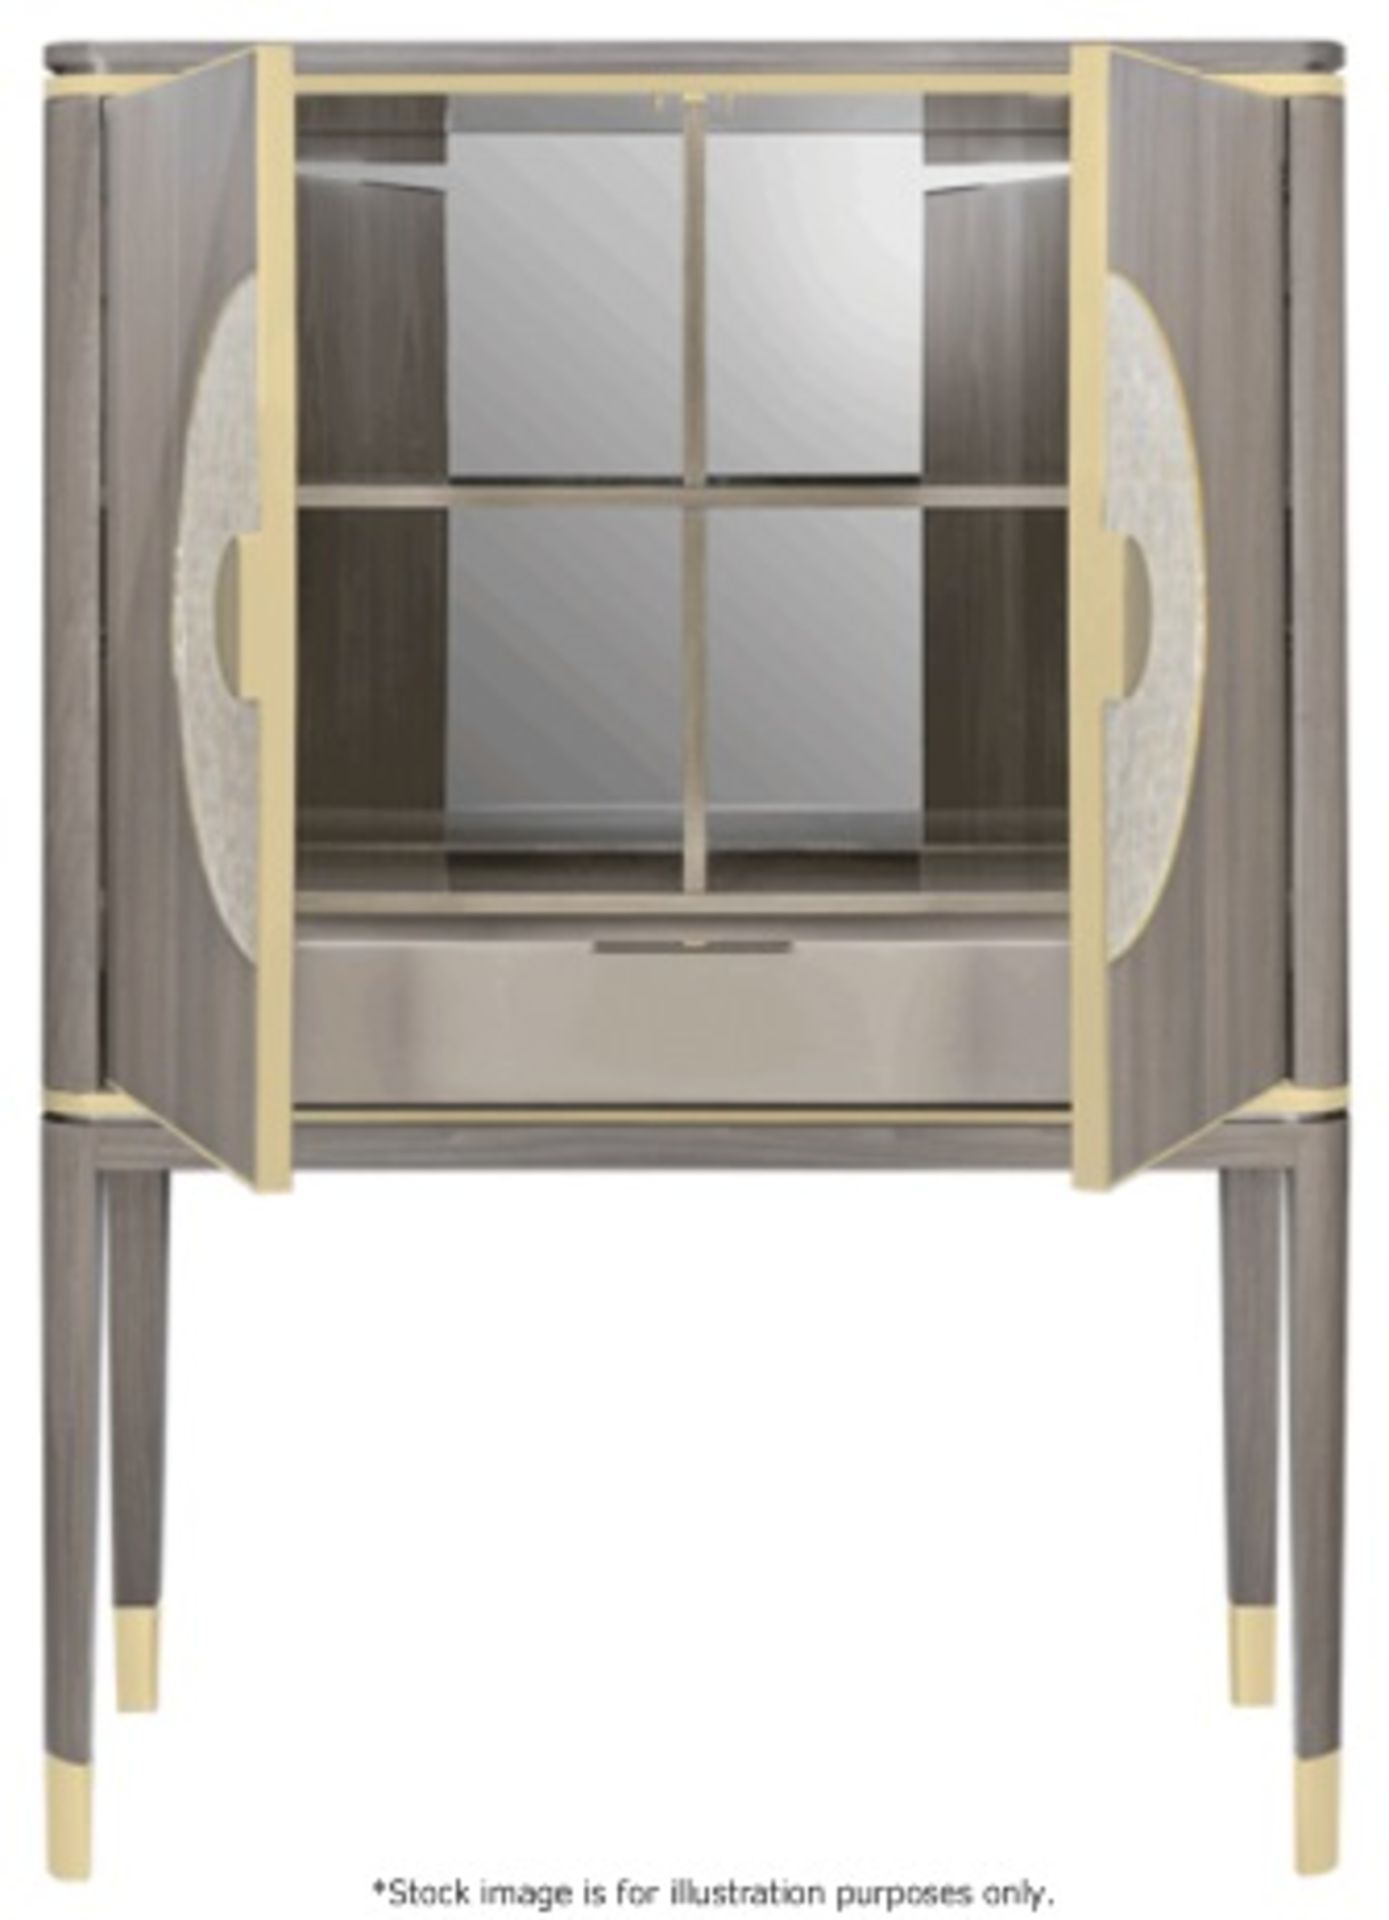 1 x FRATO 'Seville' Luxury Designer 2-Door Tall Cabinet With A High Gloss Finish - RRP £7,968 - Image 13 of 15